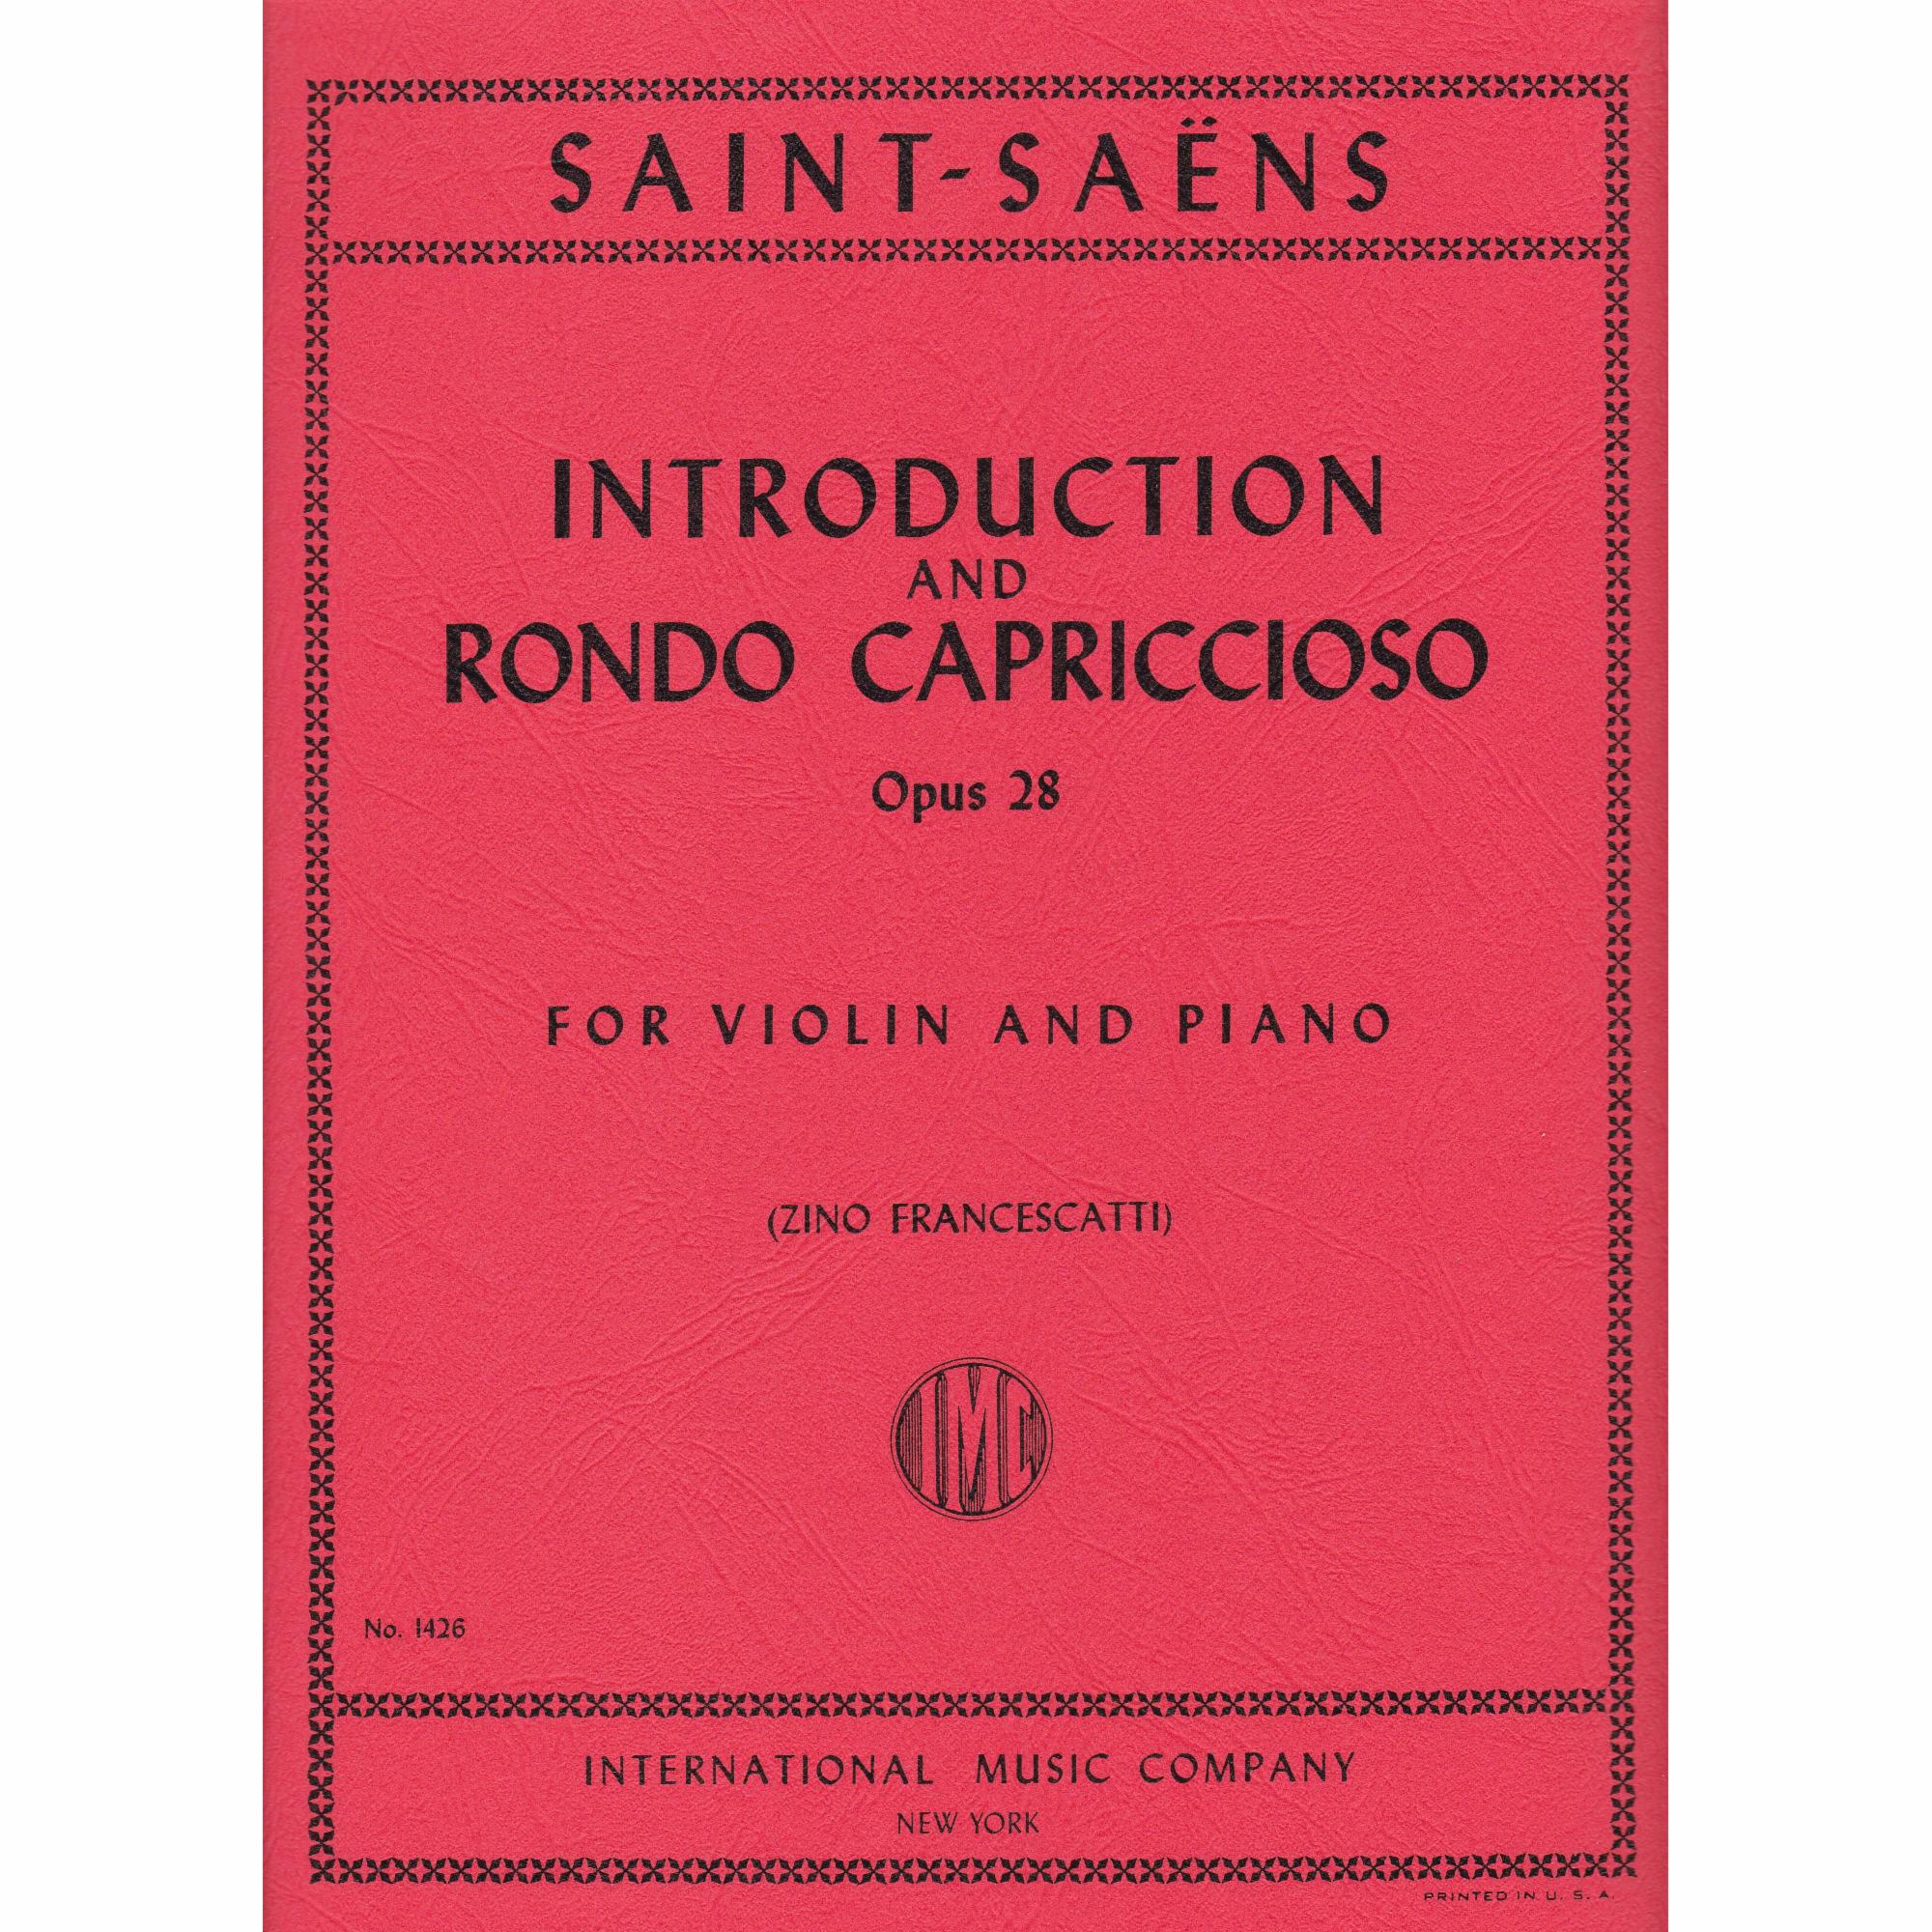 Introduction and Rondo Capriccioso for Violin and Piano, Op. 28